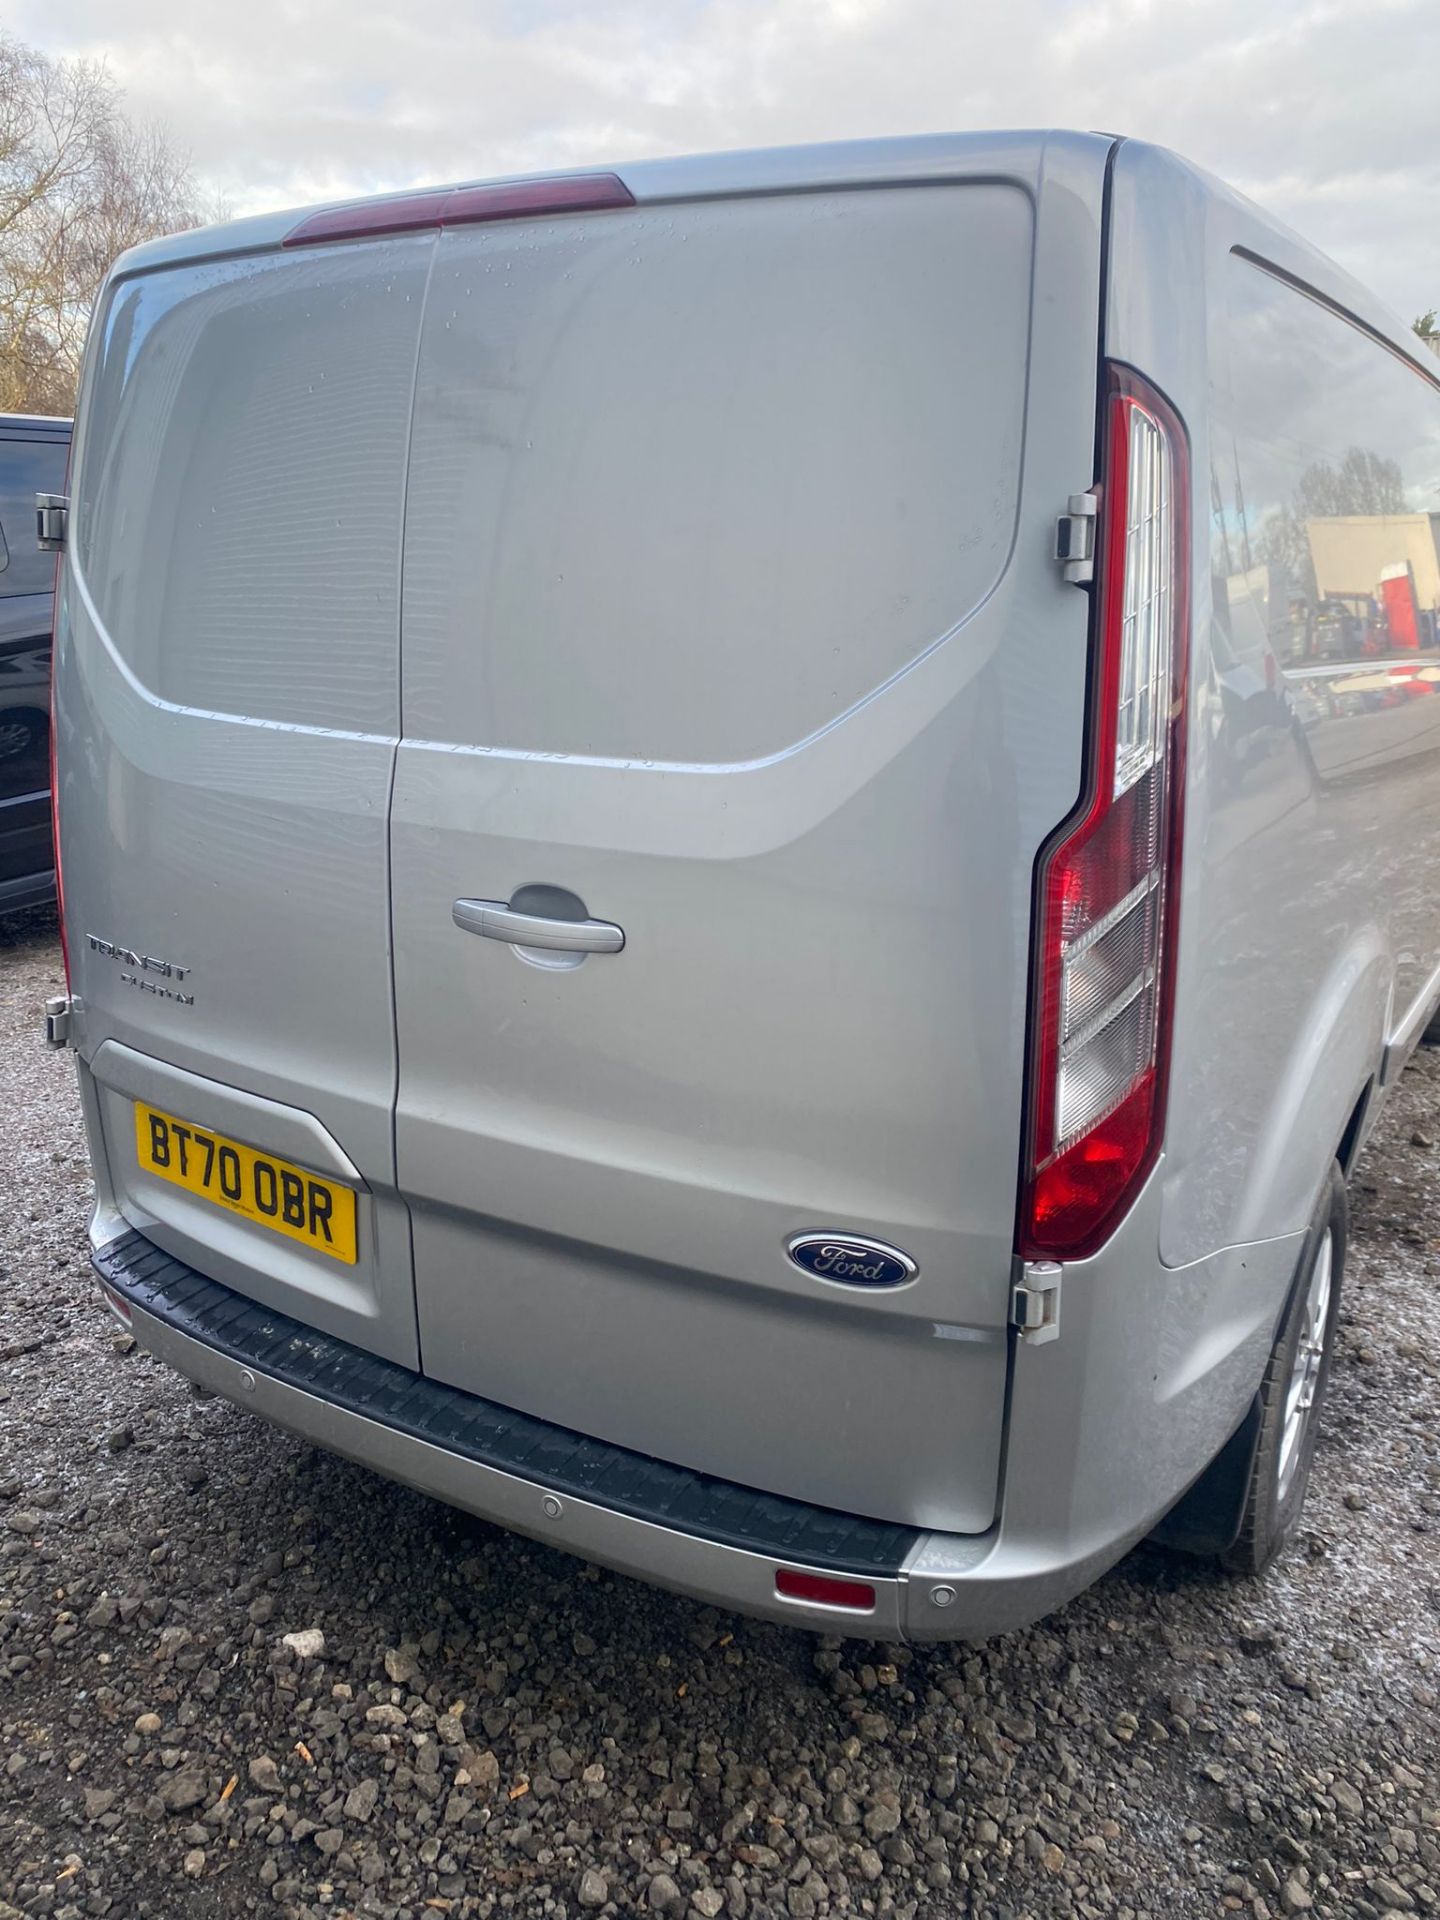 2020 70 FORD TRANSIT CUSTOM LIMITED PANEL VAN - 58K MILES - AIR CON - PLY LINED - ALLOY WHEELS - Image 5 of 6